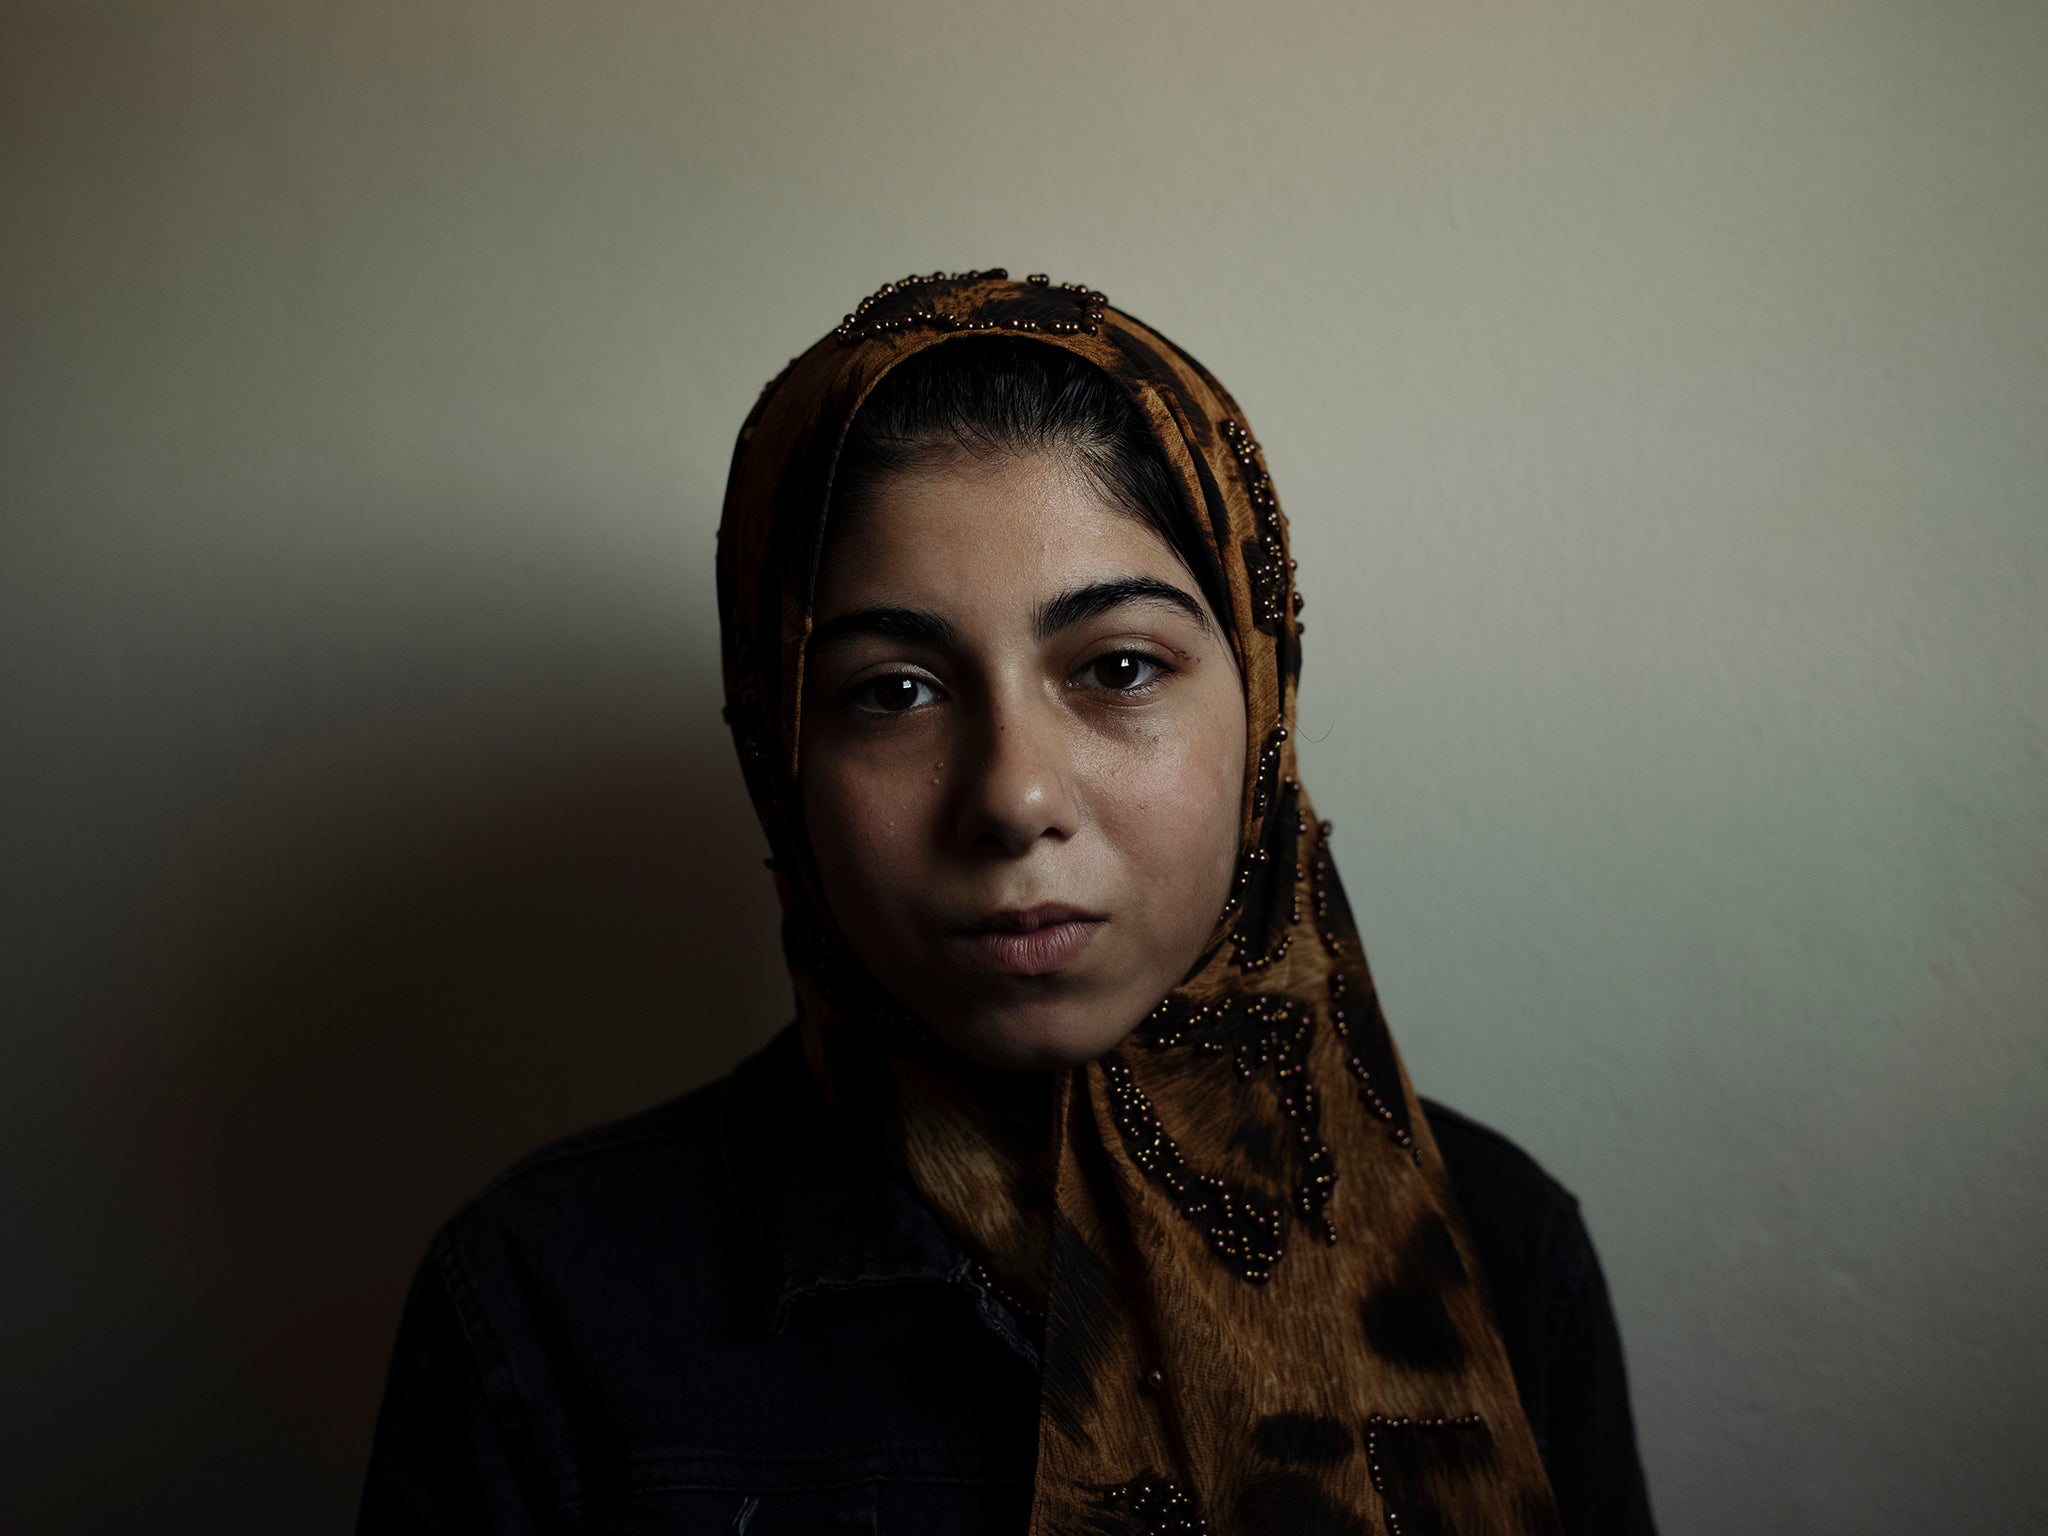 Baraka, now 13, witnessed the death of her father, sister, grandmother, four uncles and two cousins during Gaza’s third war of 2014